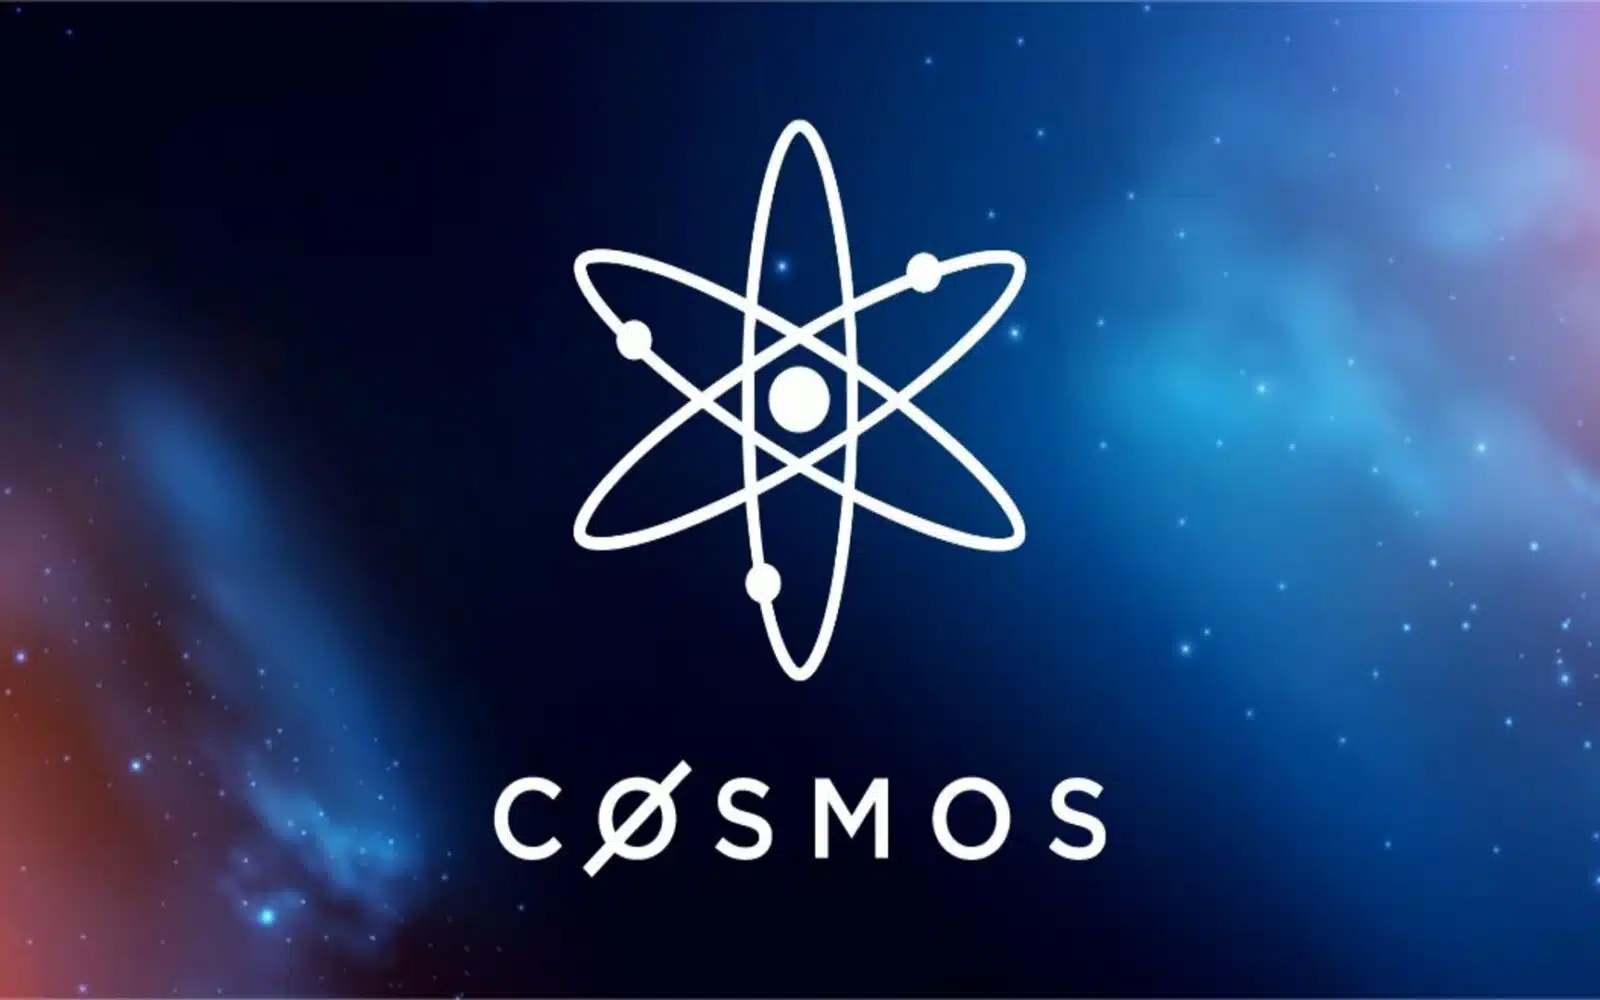 Cosmos: The leader and potential winner in modular blockchain